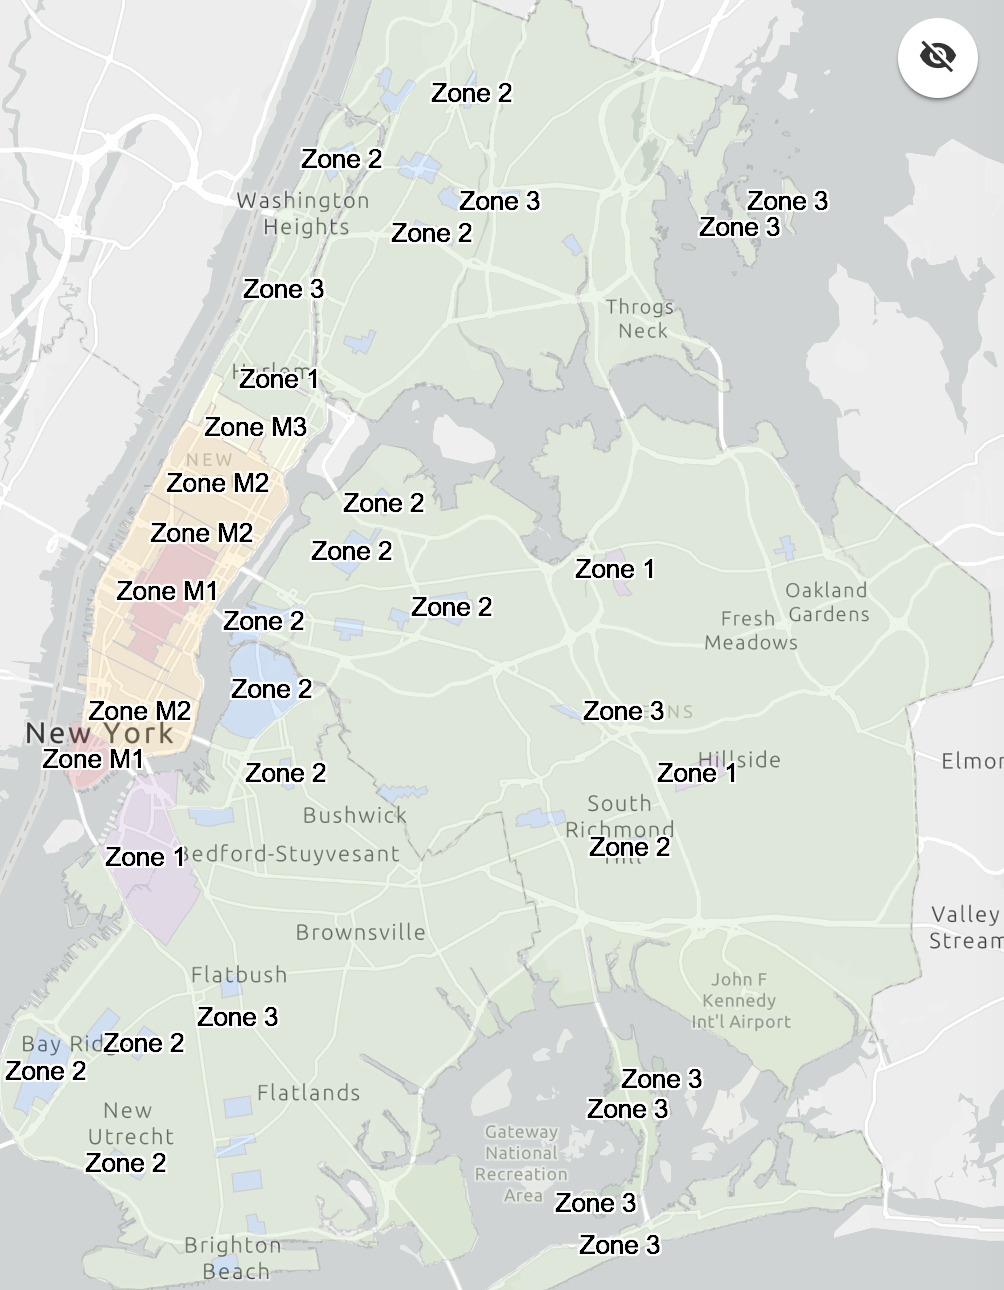 Parking Meter Rates Will Double Next Month In Some Brooklyn Neighborhoods